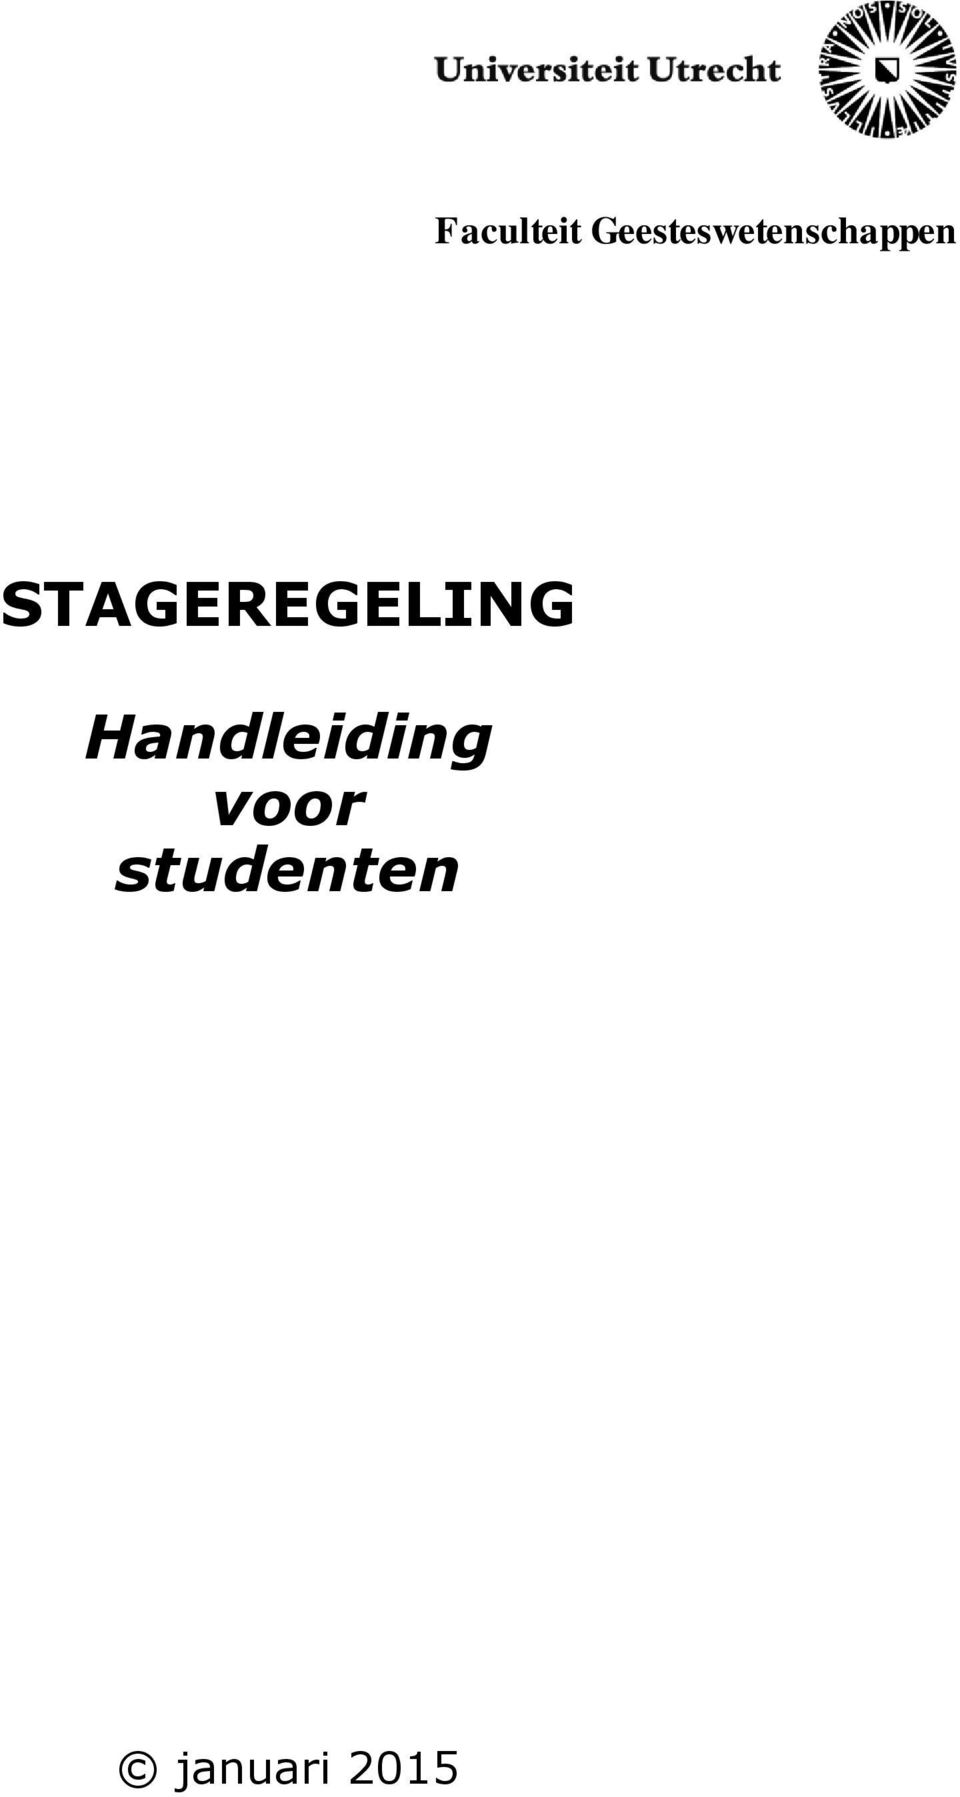 STAGEREGELING